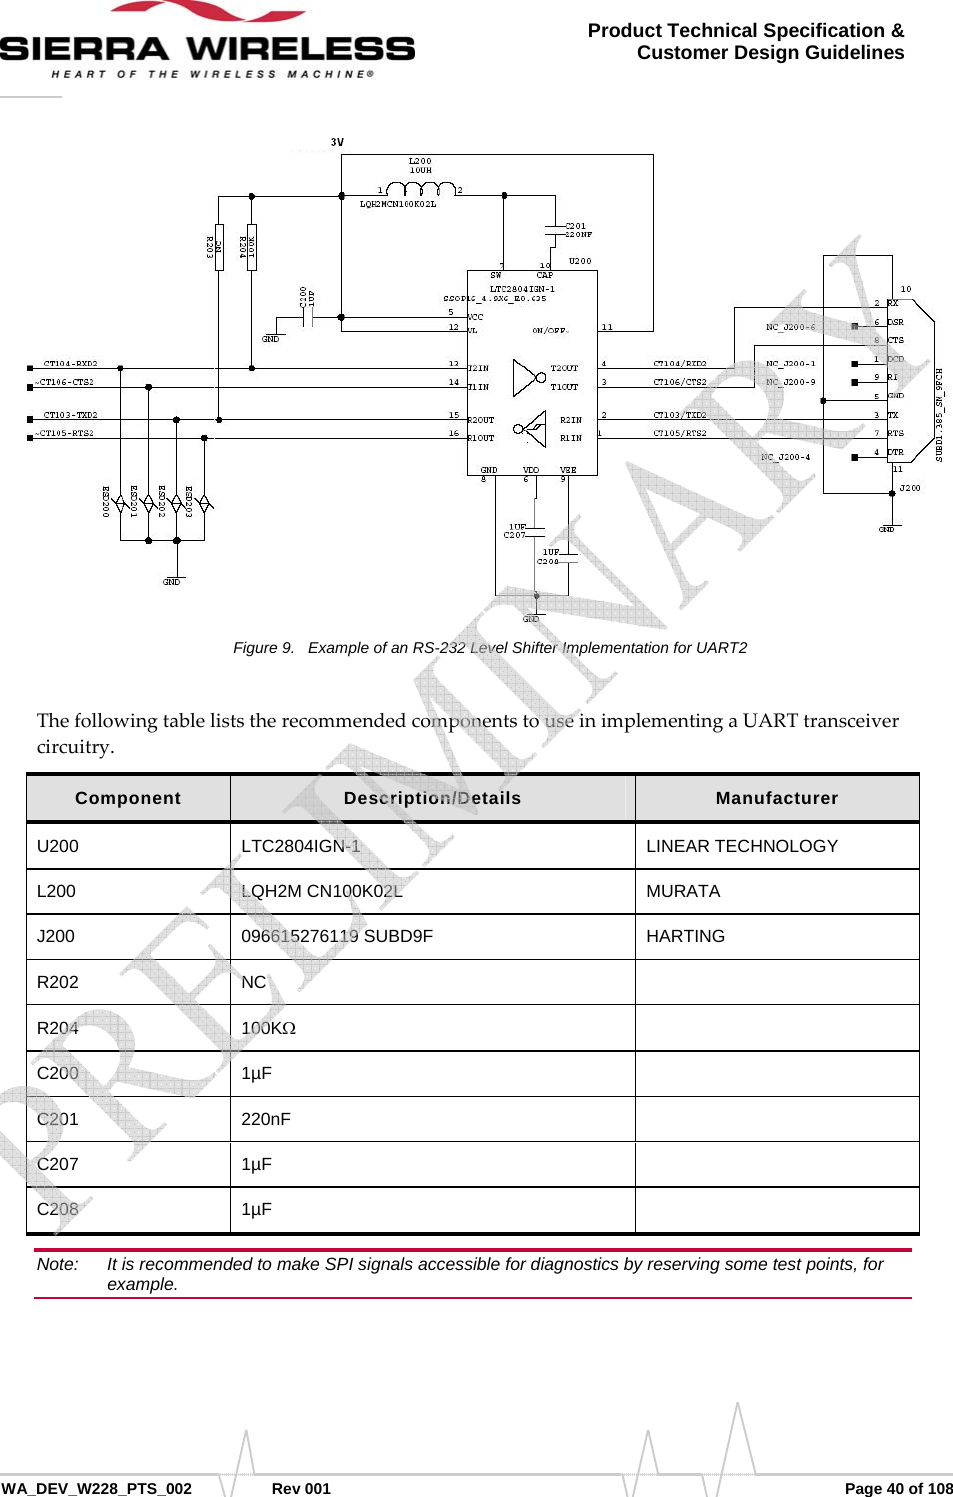      WA_DEV_W228_PTS_002 Rev 001  Page 40 of 108 Product Technical Specification &amp; Customer Design Guidelines Figure 9.  Example of an RS-232 Level Shifter Implementation for UART2 ThefollowingtableliststherecommendedcomponentstouseinimplementingaUARTtransceivercircuitry.Component  Description/Details  Manufacturer U200 LTC2804IGN-1  LINEAR TECHNOLOGY L200 LQH2M CN100K02L  MURATA J200 096615276119 SUBD9F  HARTING R202 NC   R204  100KΩ  C200 1µF   C201 220nF   C207 1µF   C208 1µF   Note:   It is recommended to make SPI signals accessible for diagnostics by reserving some test points, for example.    